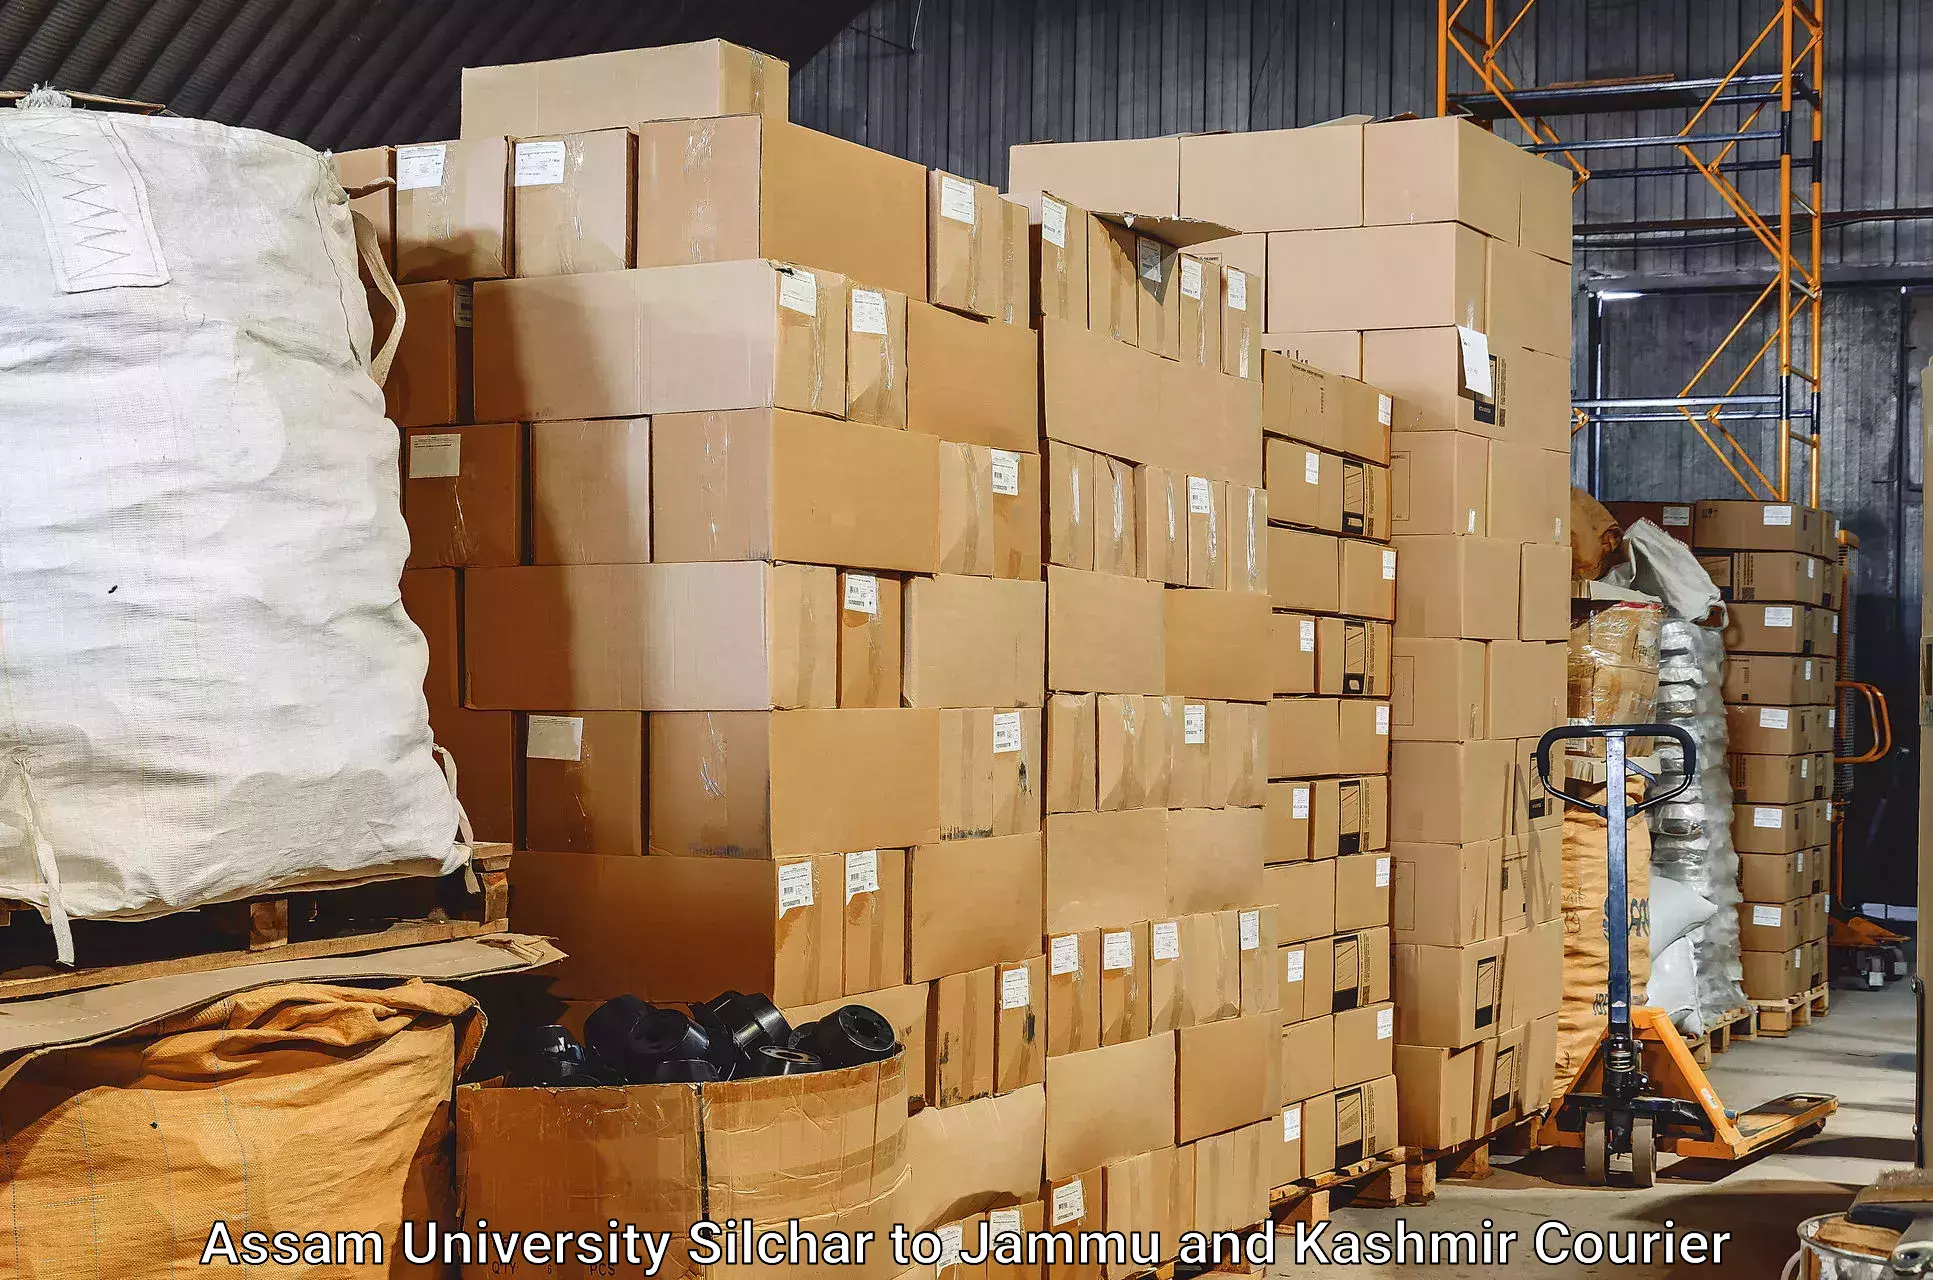 High-quality baggage shipment in Assam University Silchar to Sopore